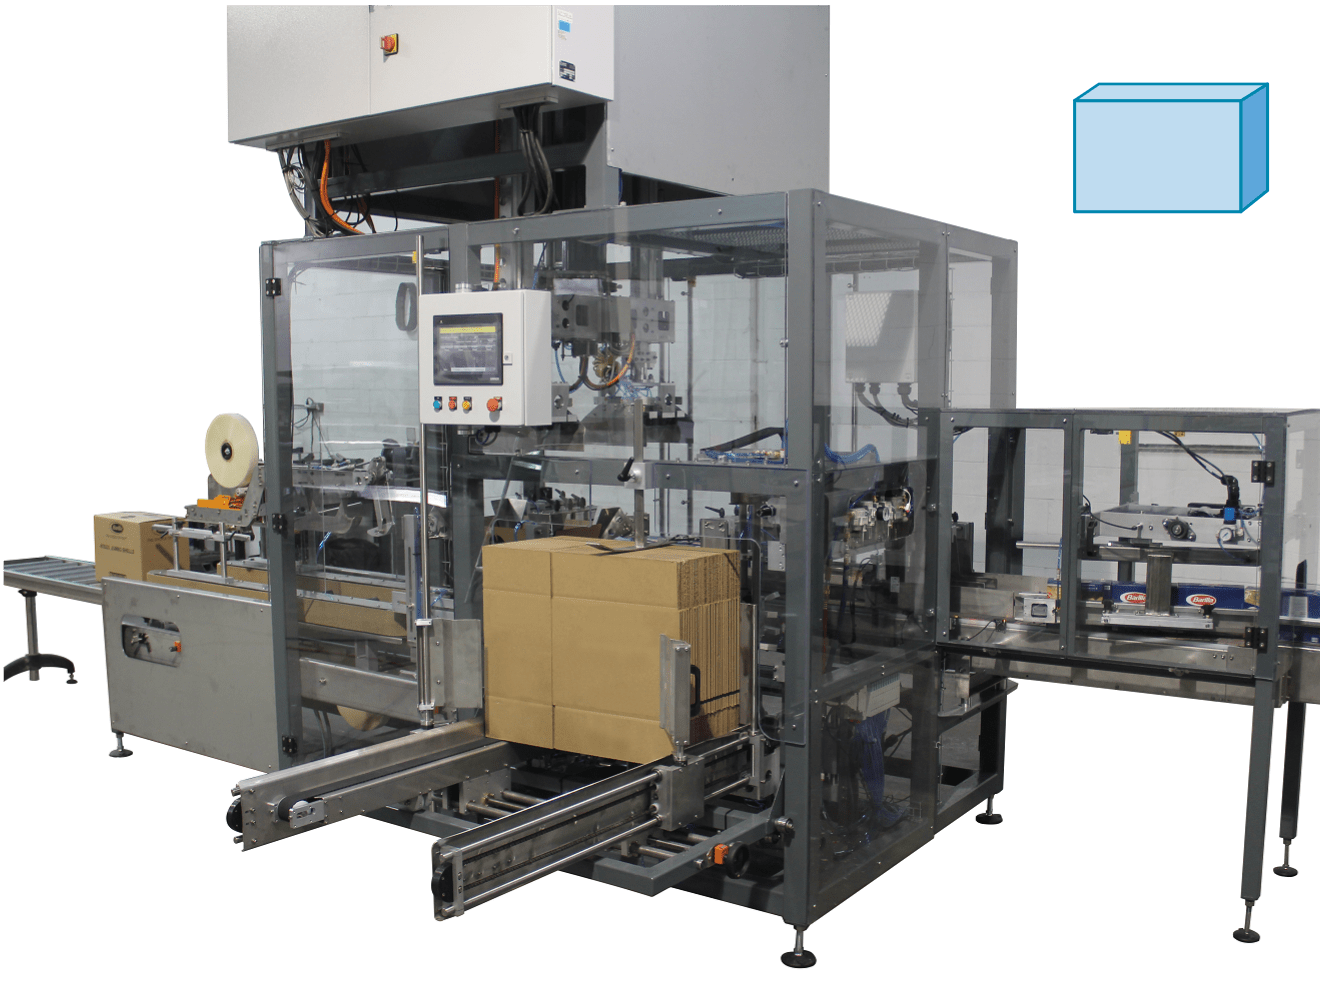 Automatic case packing machine for cartons